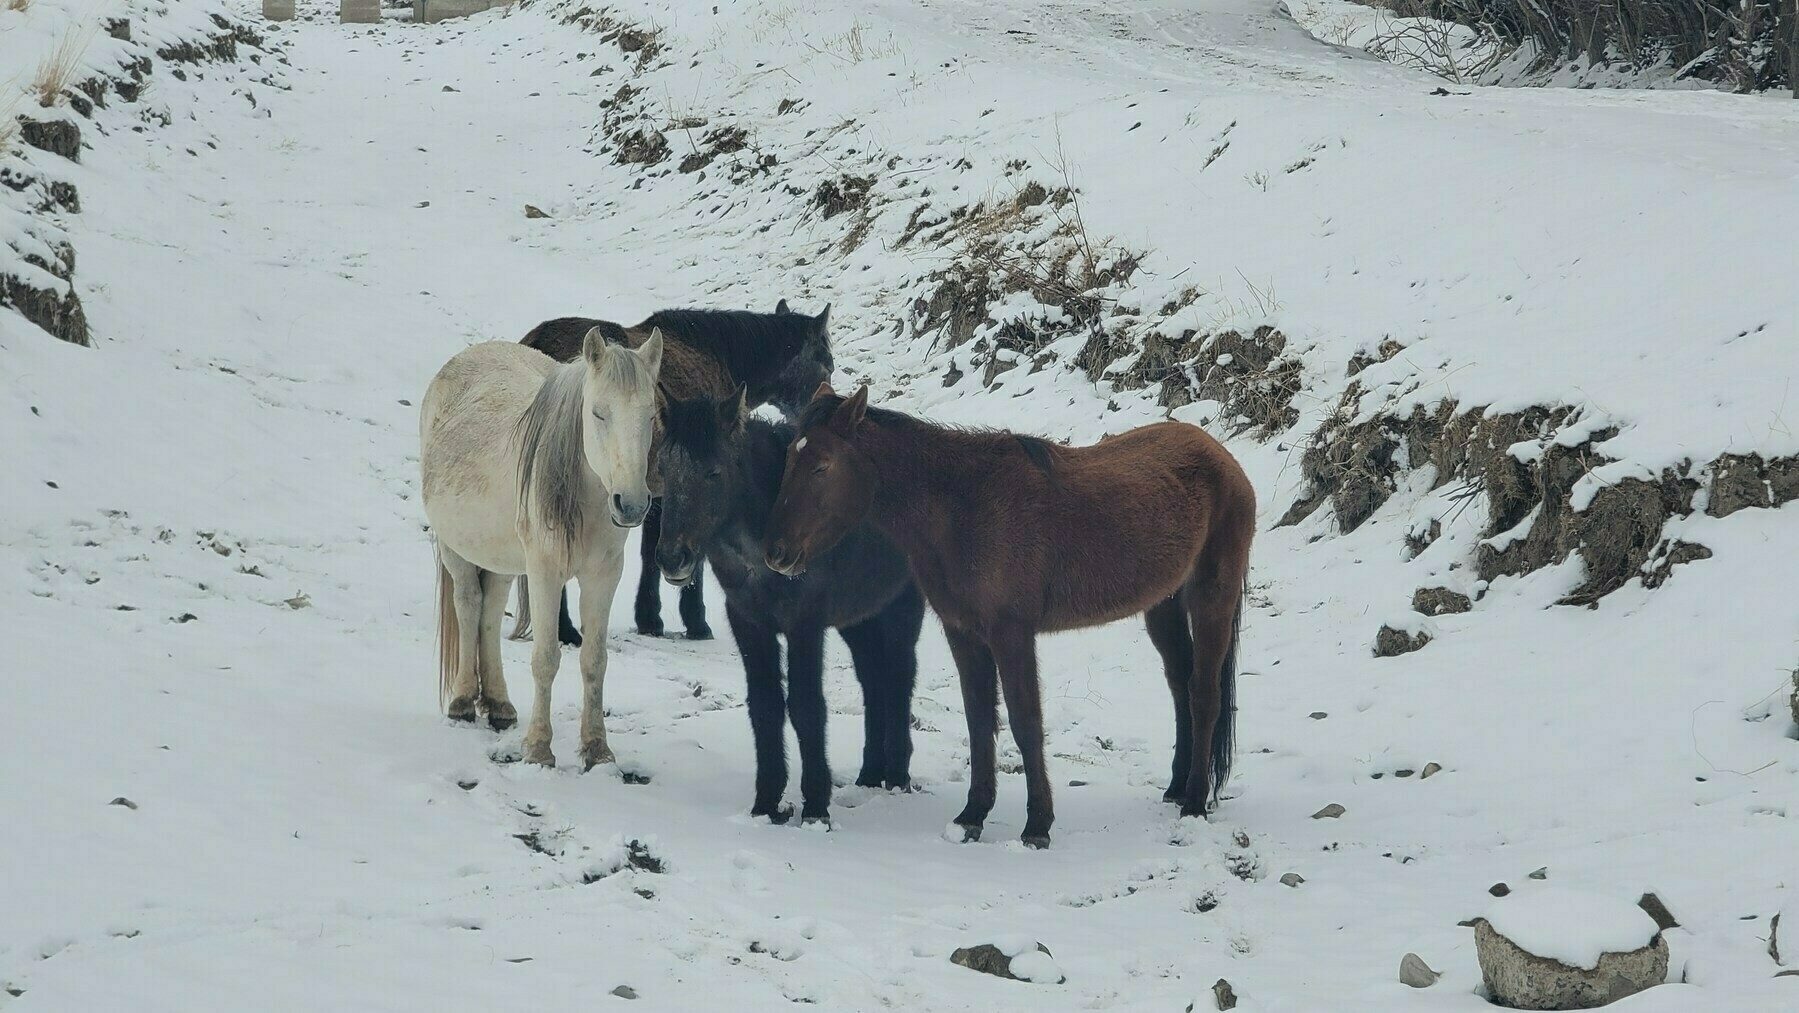 4 horses - one black, two dark brown, and one white - standing near each other in a shallow, dried-up canal with snow all around